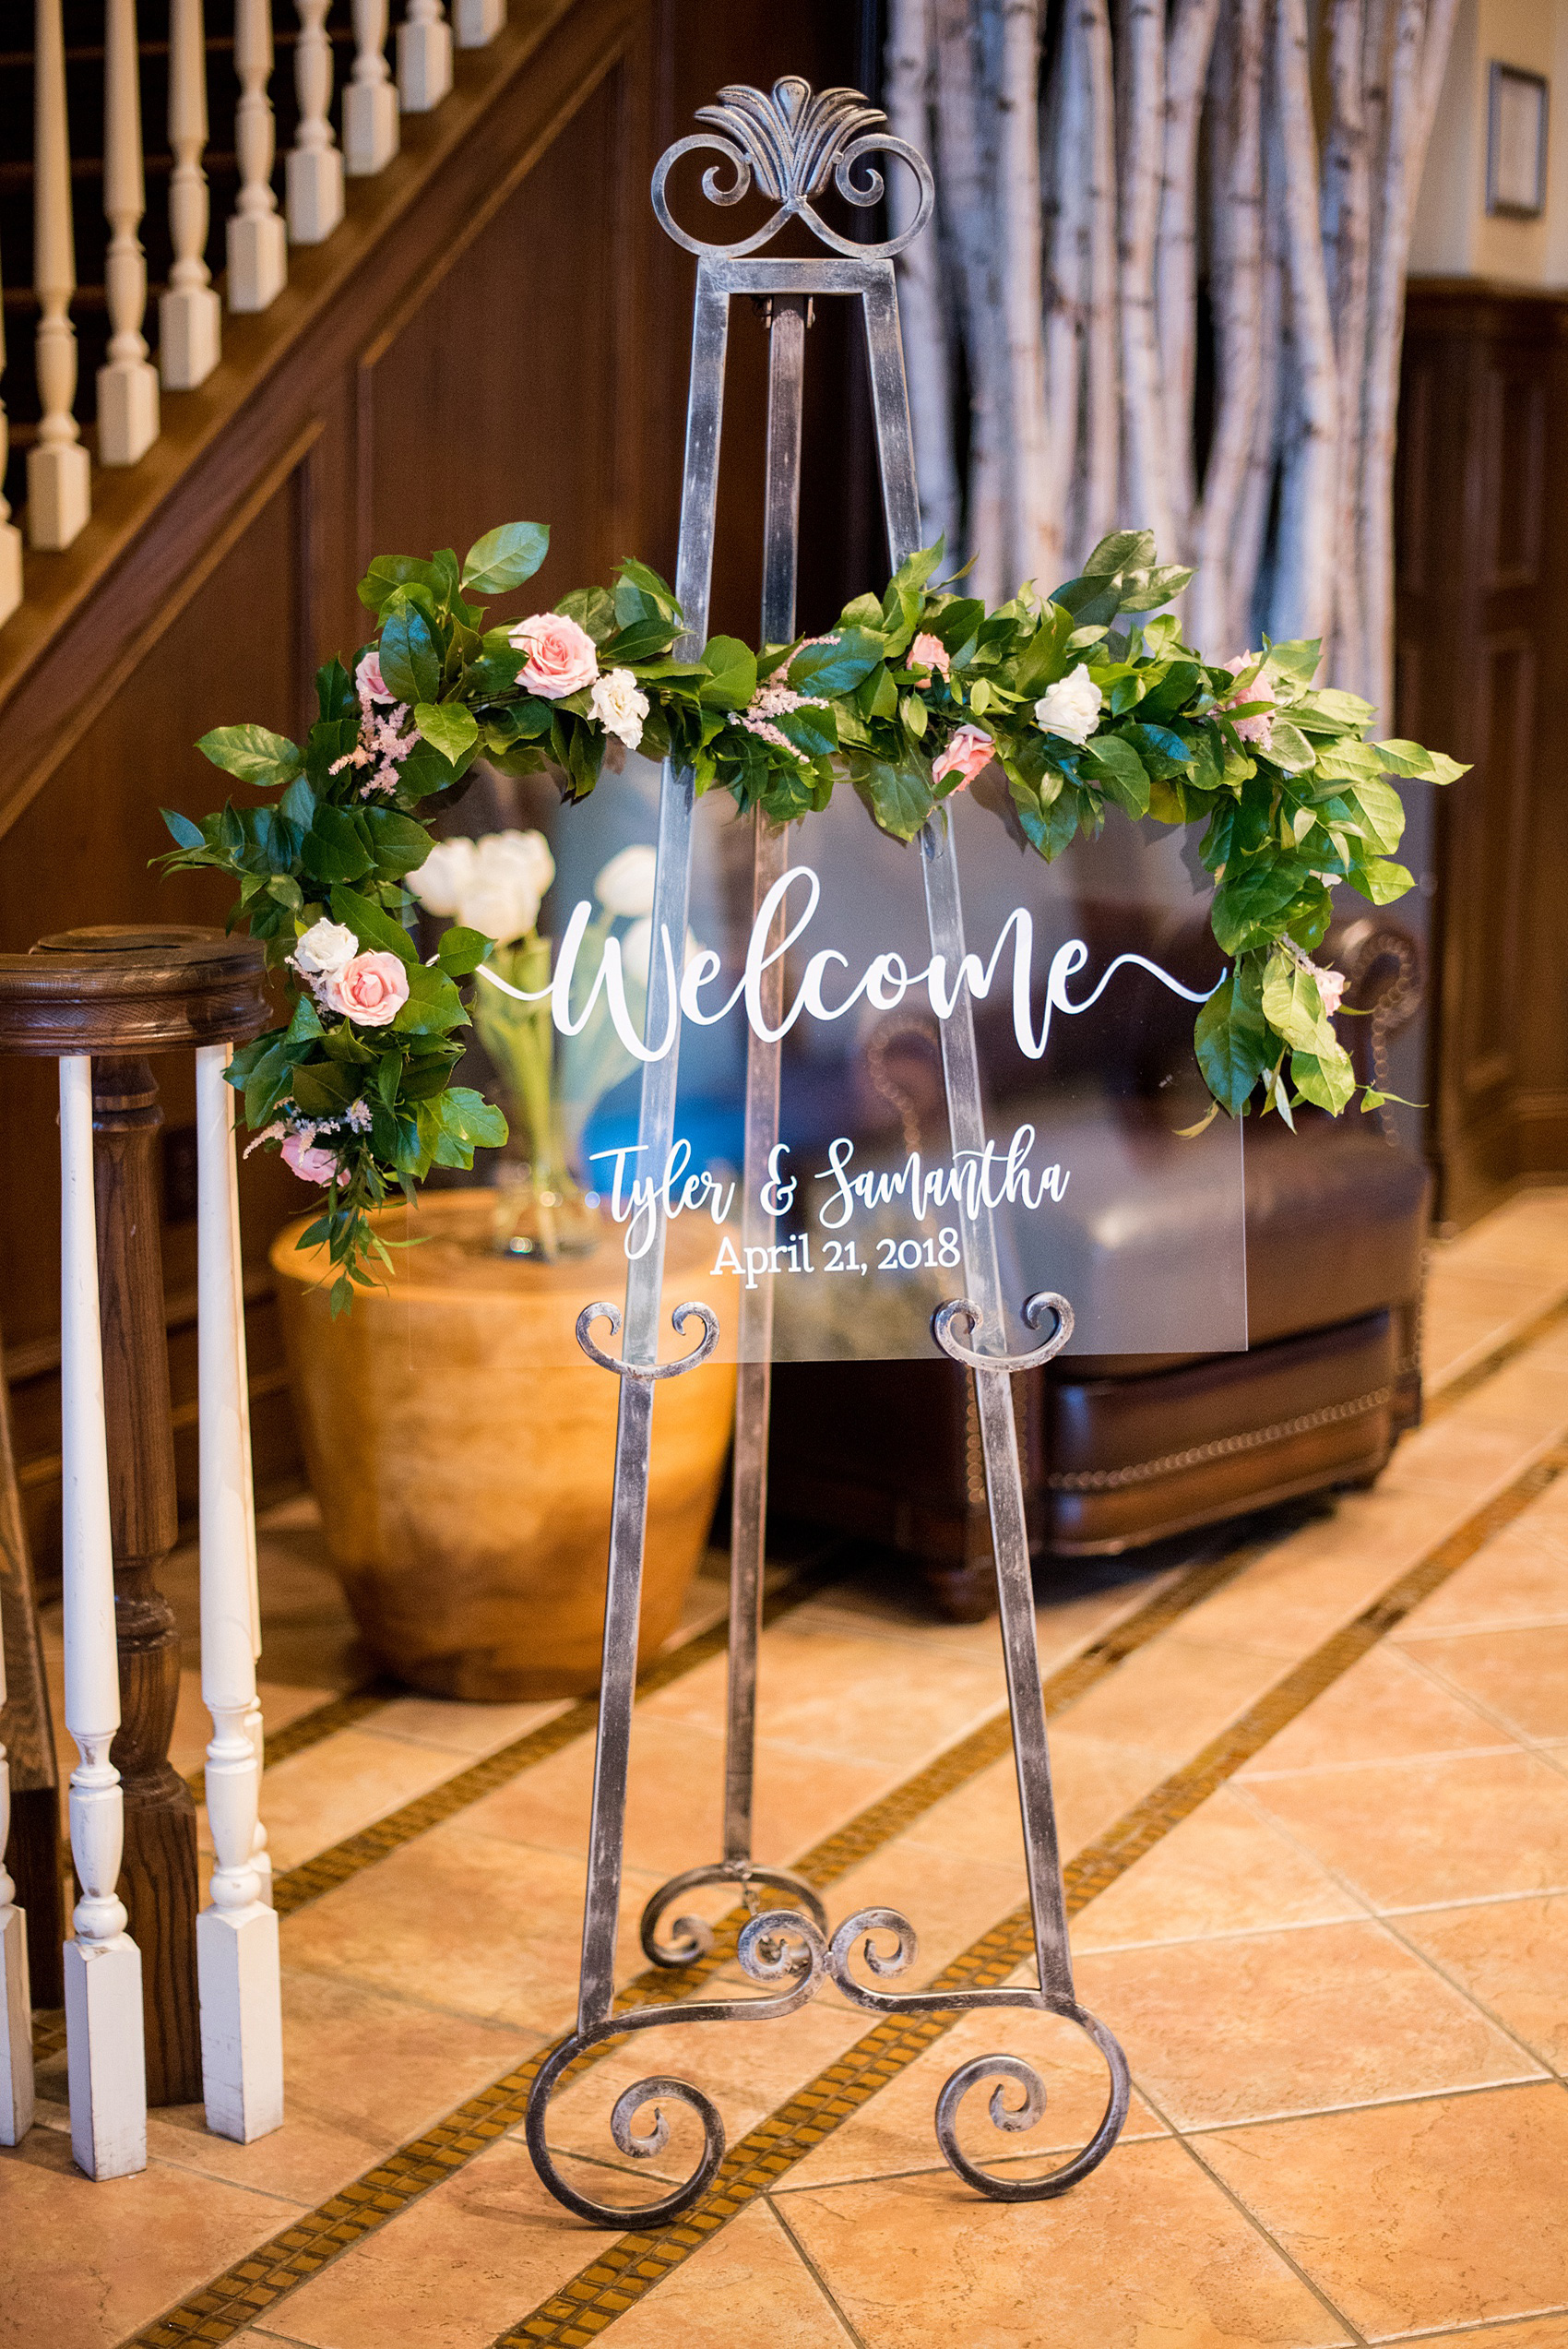 Saratoga Springs destination wedding photos by Mikkel Paige Photography. The spring event was held at Saratoga National Golf Club venue for a spring celebration. The bride and groom welcomed guests to the reception with a custom white and clear sign, decorated with flowers. #SaratogaSpringsNY #SaratogaSprings #mikkelpaige #NYwedding #destinationwedding #saratogaweddingvenue #golfcoursewedding #weddingsigns #customsignage #clearsigns #weddingwelcomesign